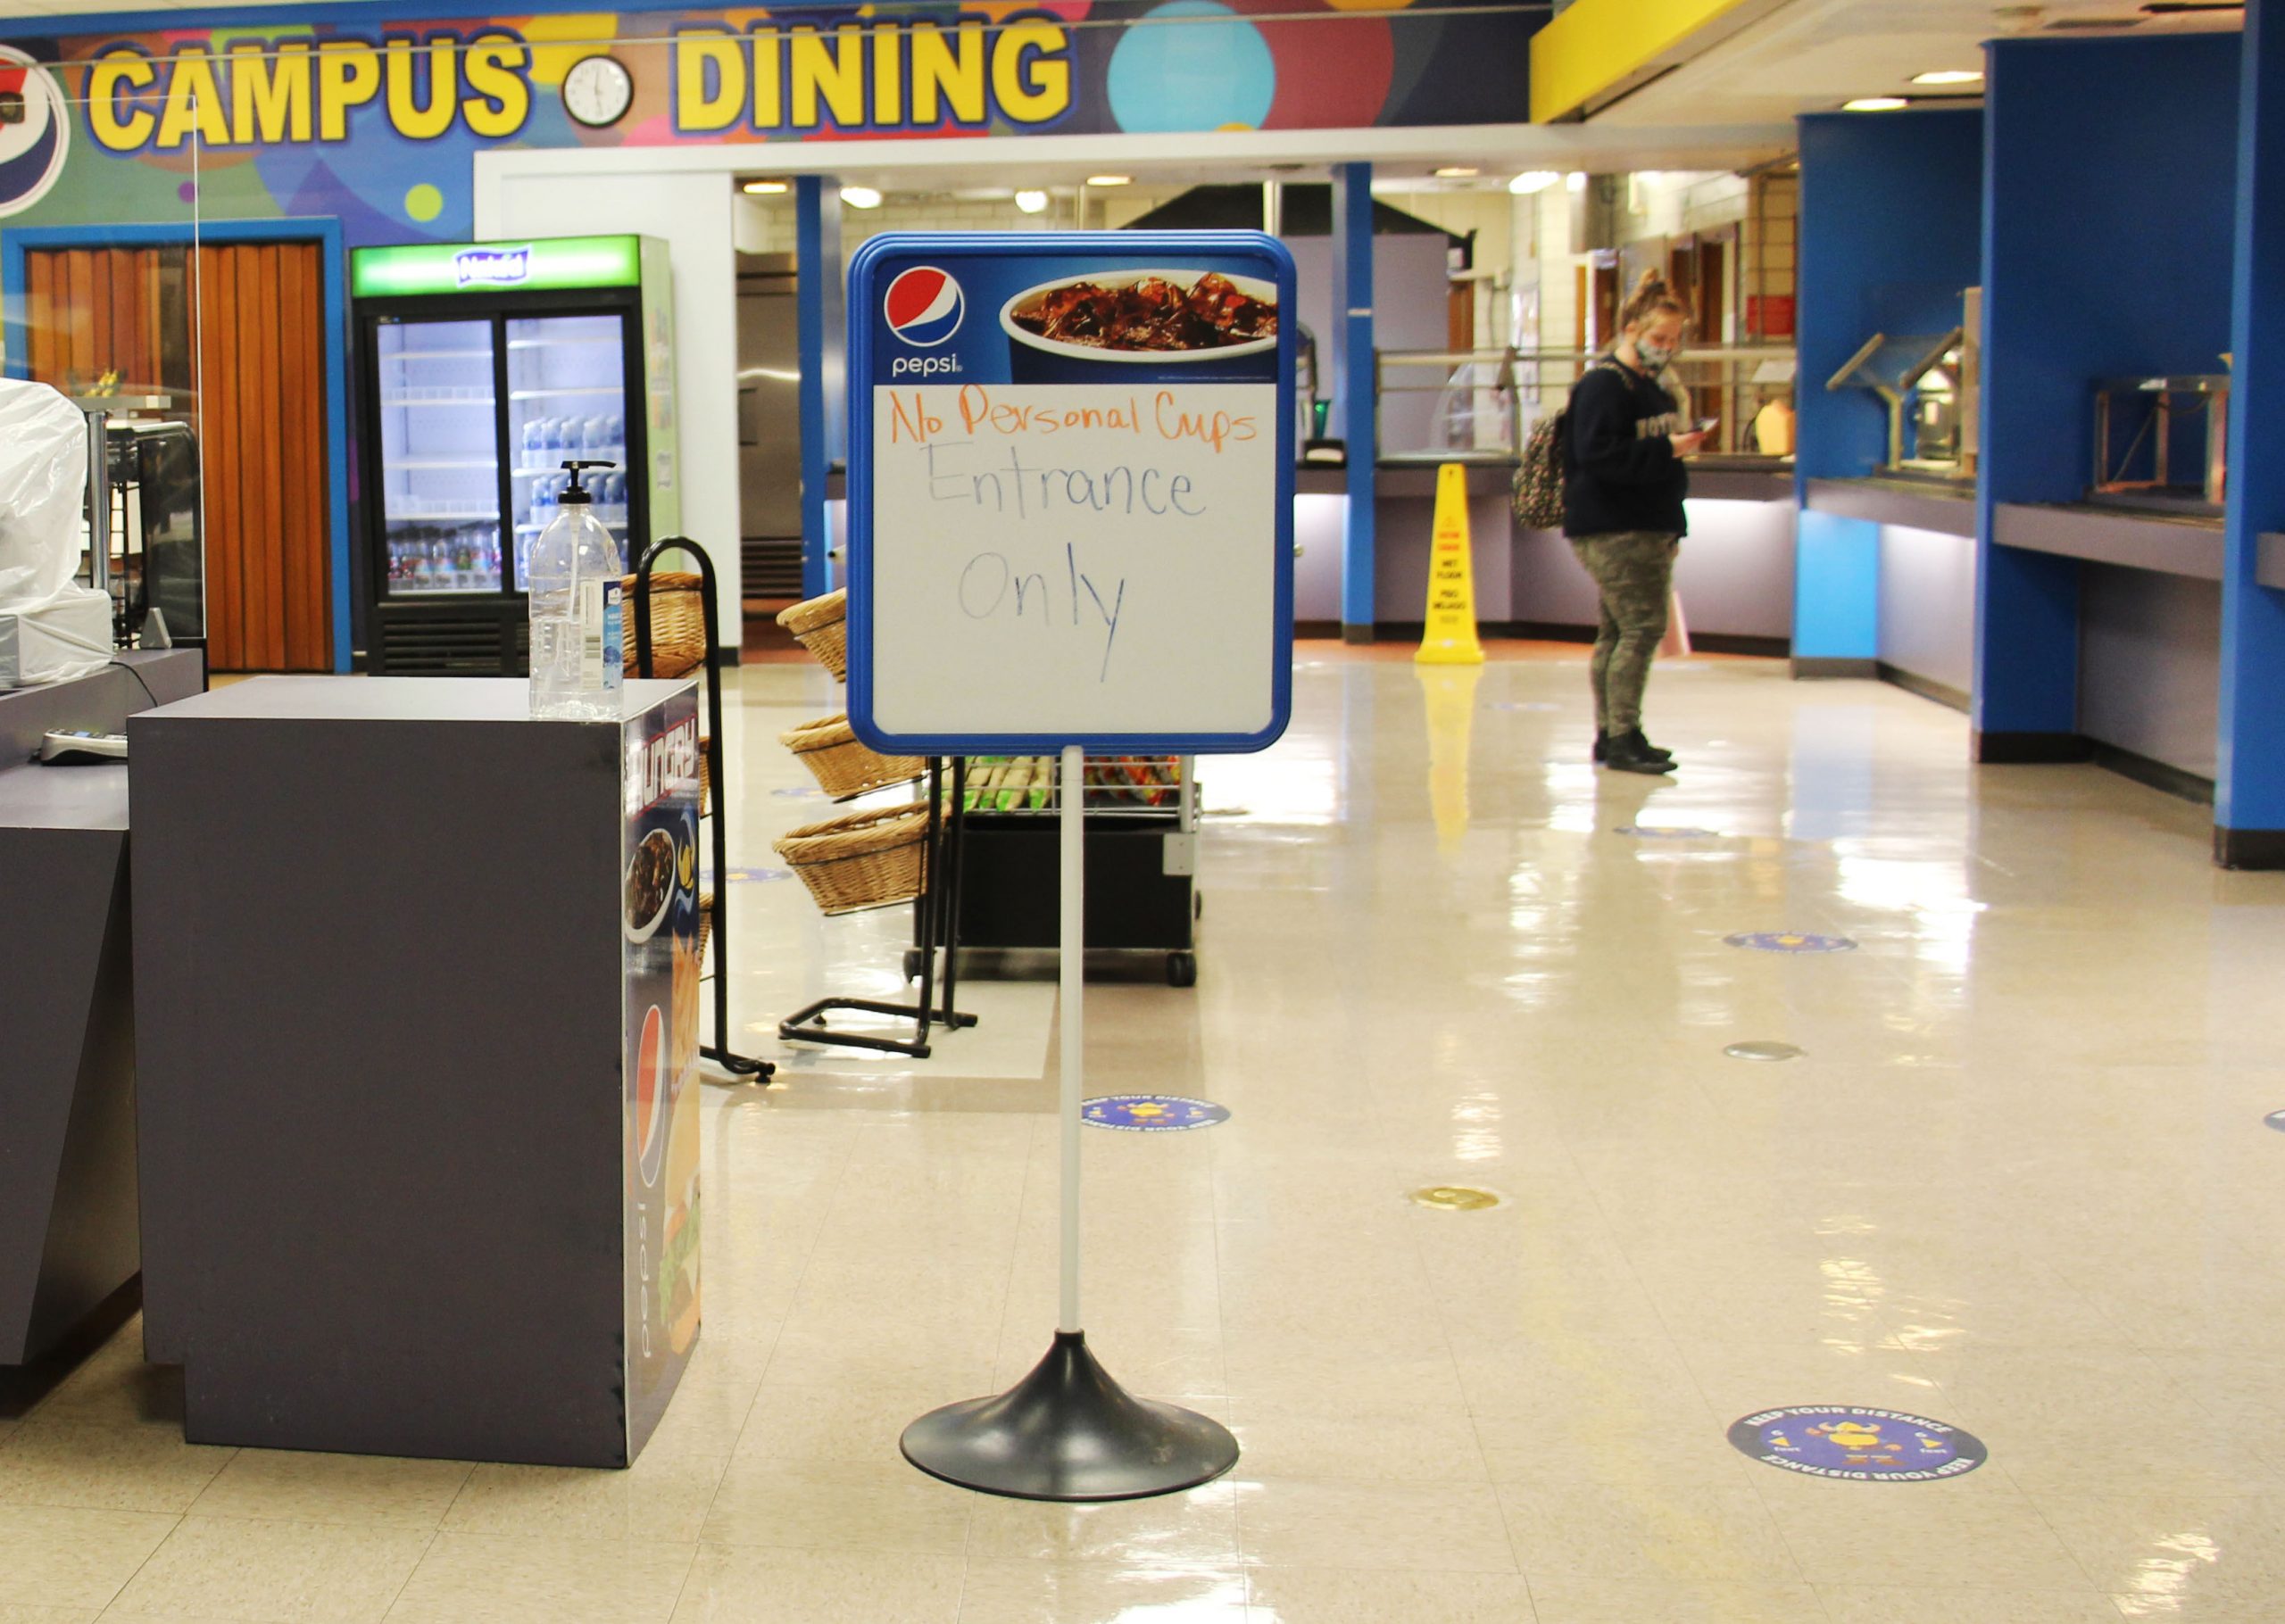 Campus Dining reopens with limited menu